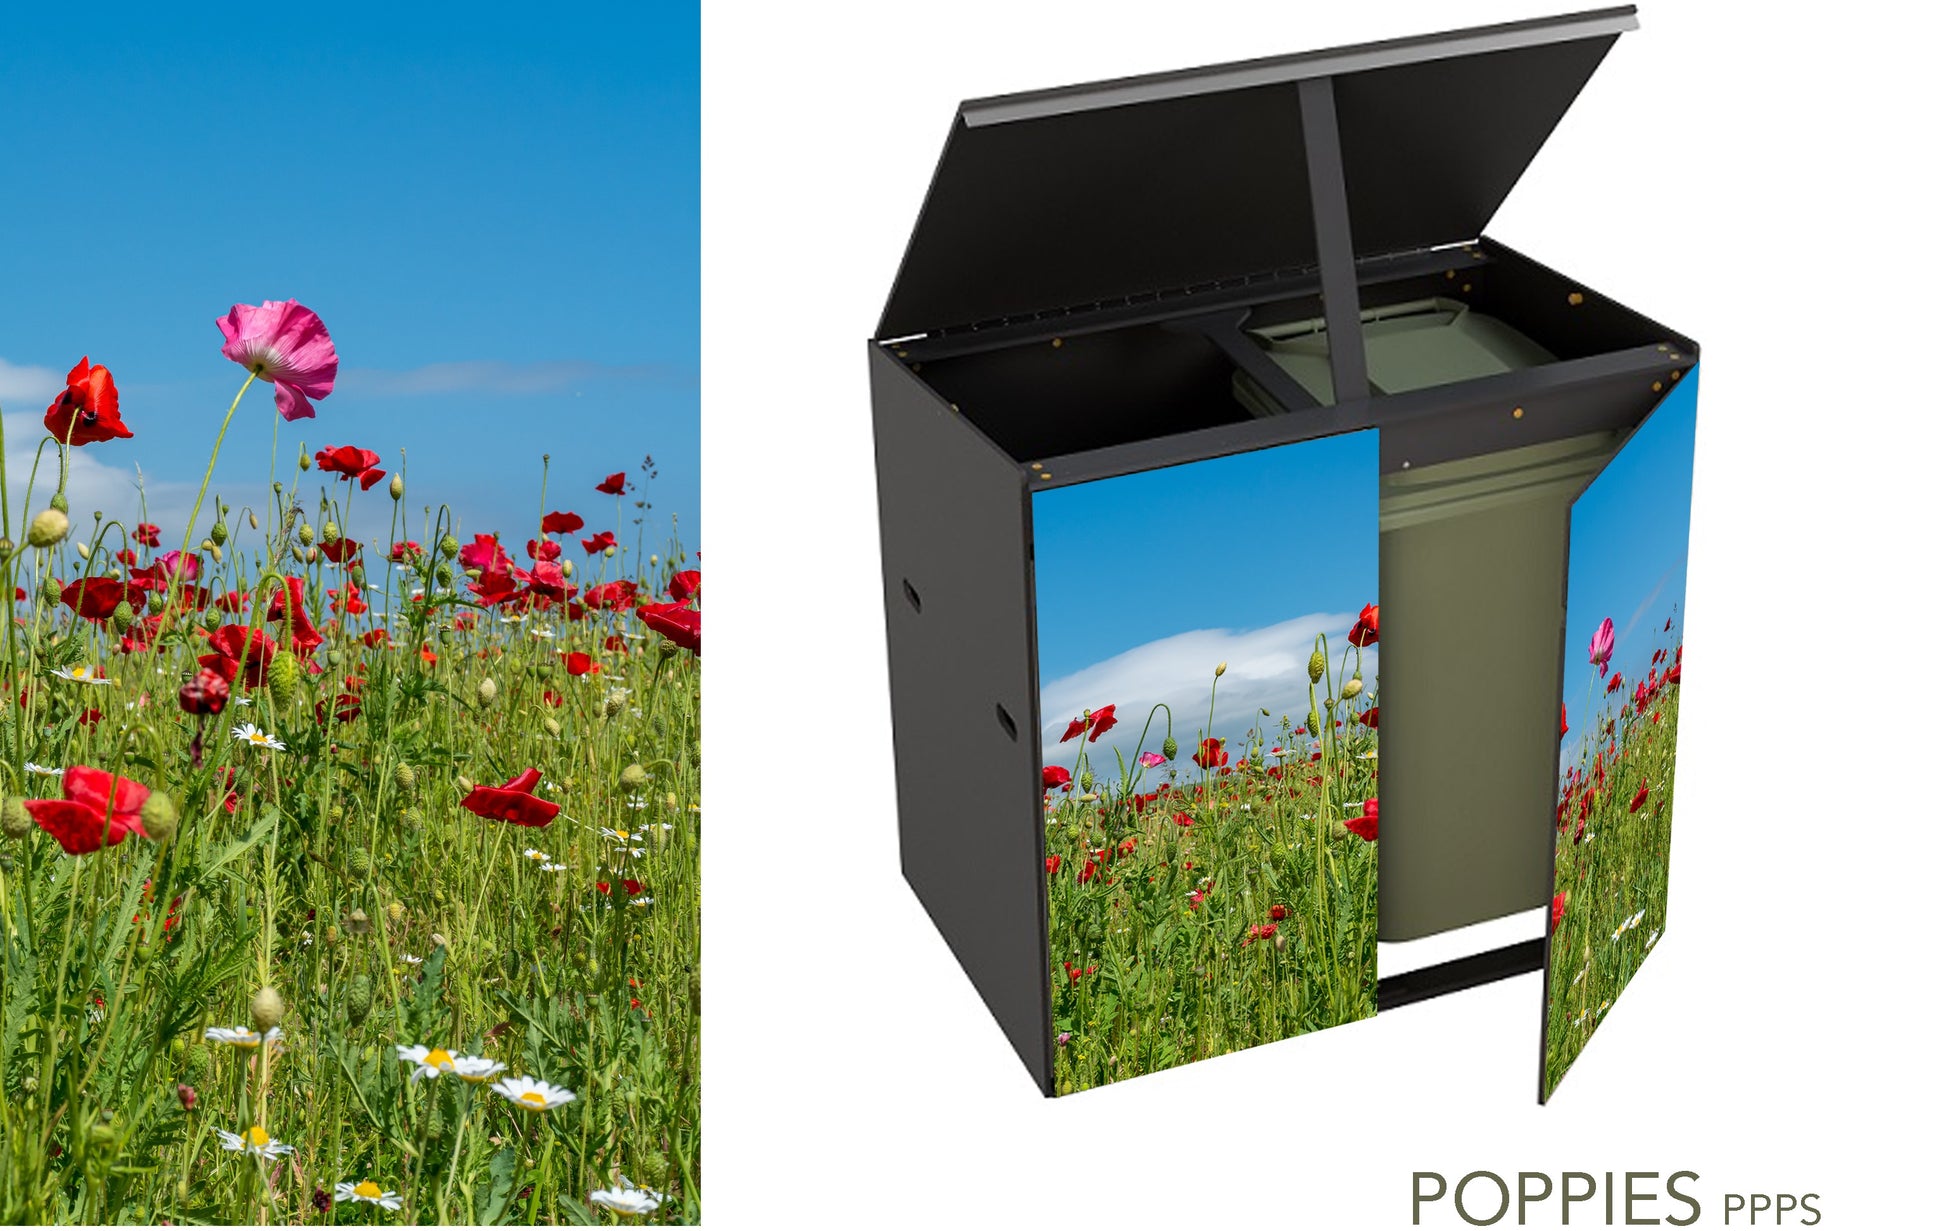 The 2 bin storage unit seen from the front featuring the same poppies image as before but the lid of the store is propped open nd a door is ajar revealing a green wheelie-bin inside.